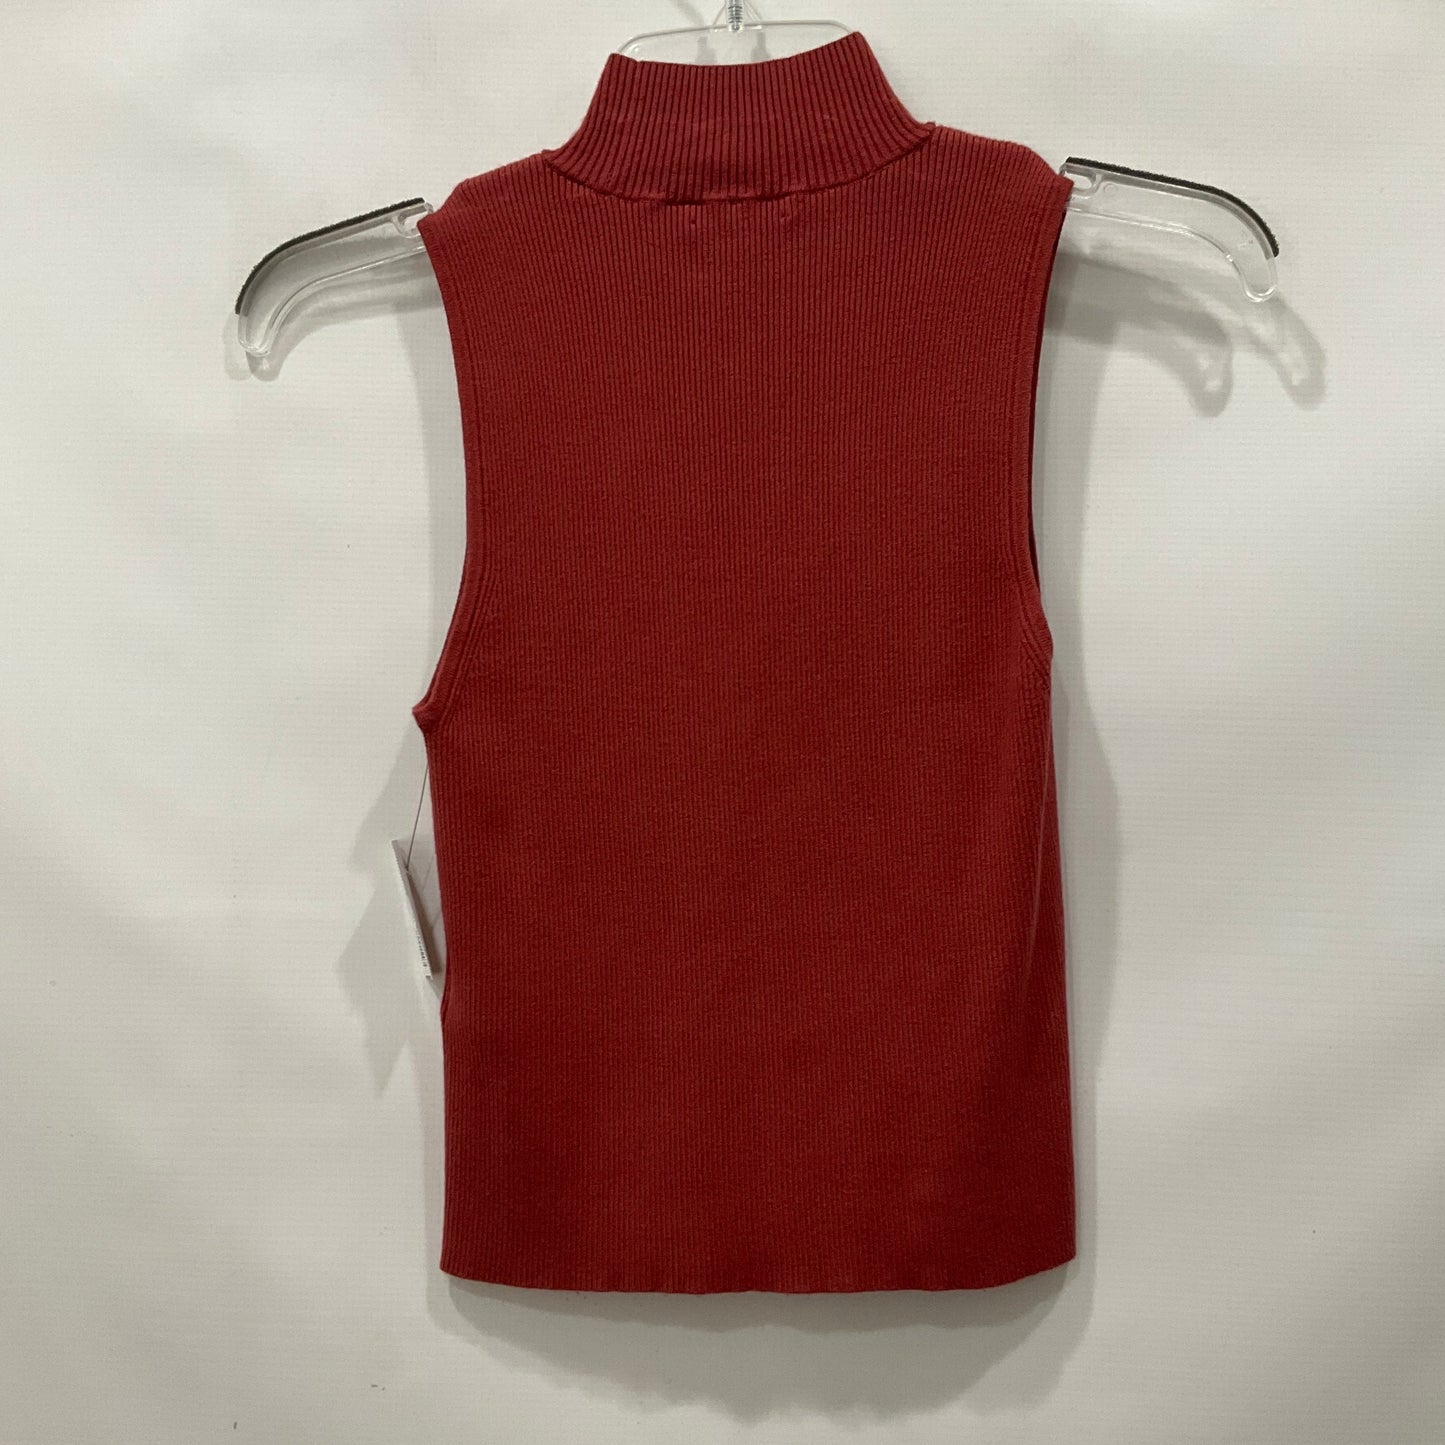 Red Top Sleeveless Basic Madewell, Size S